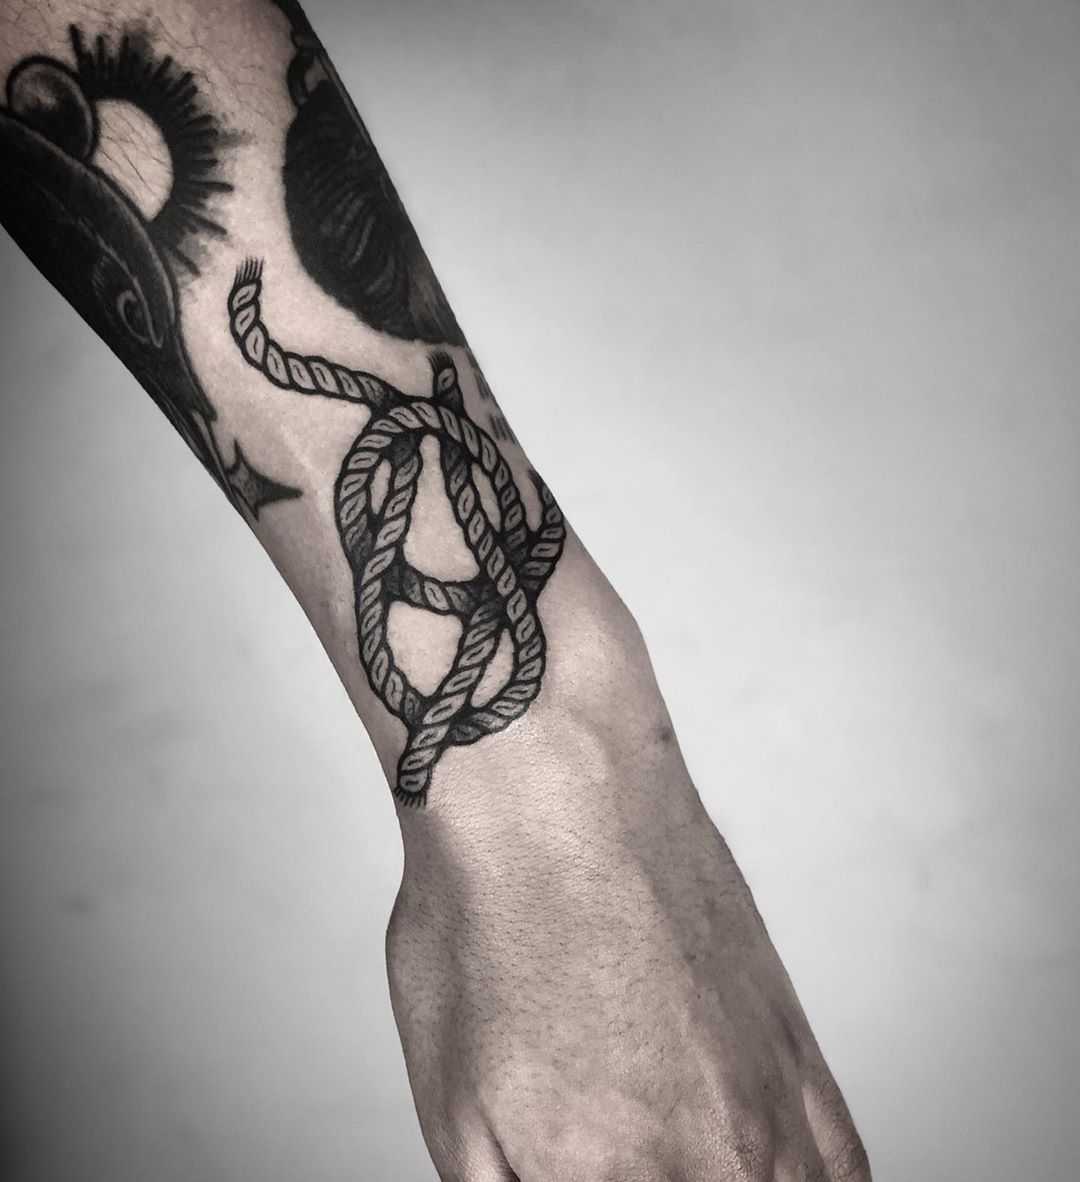 Tied rope by tattooist MAIC